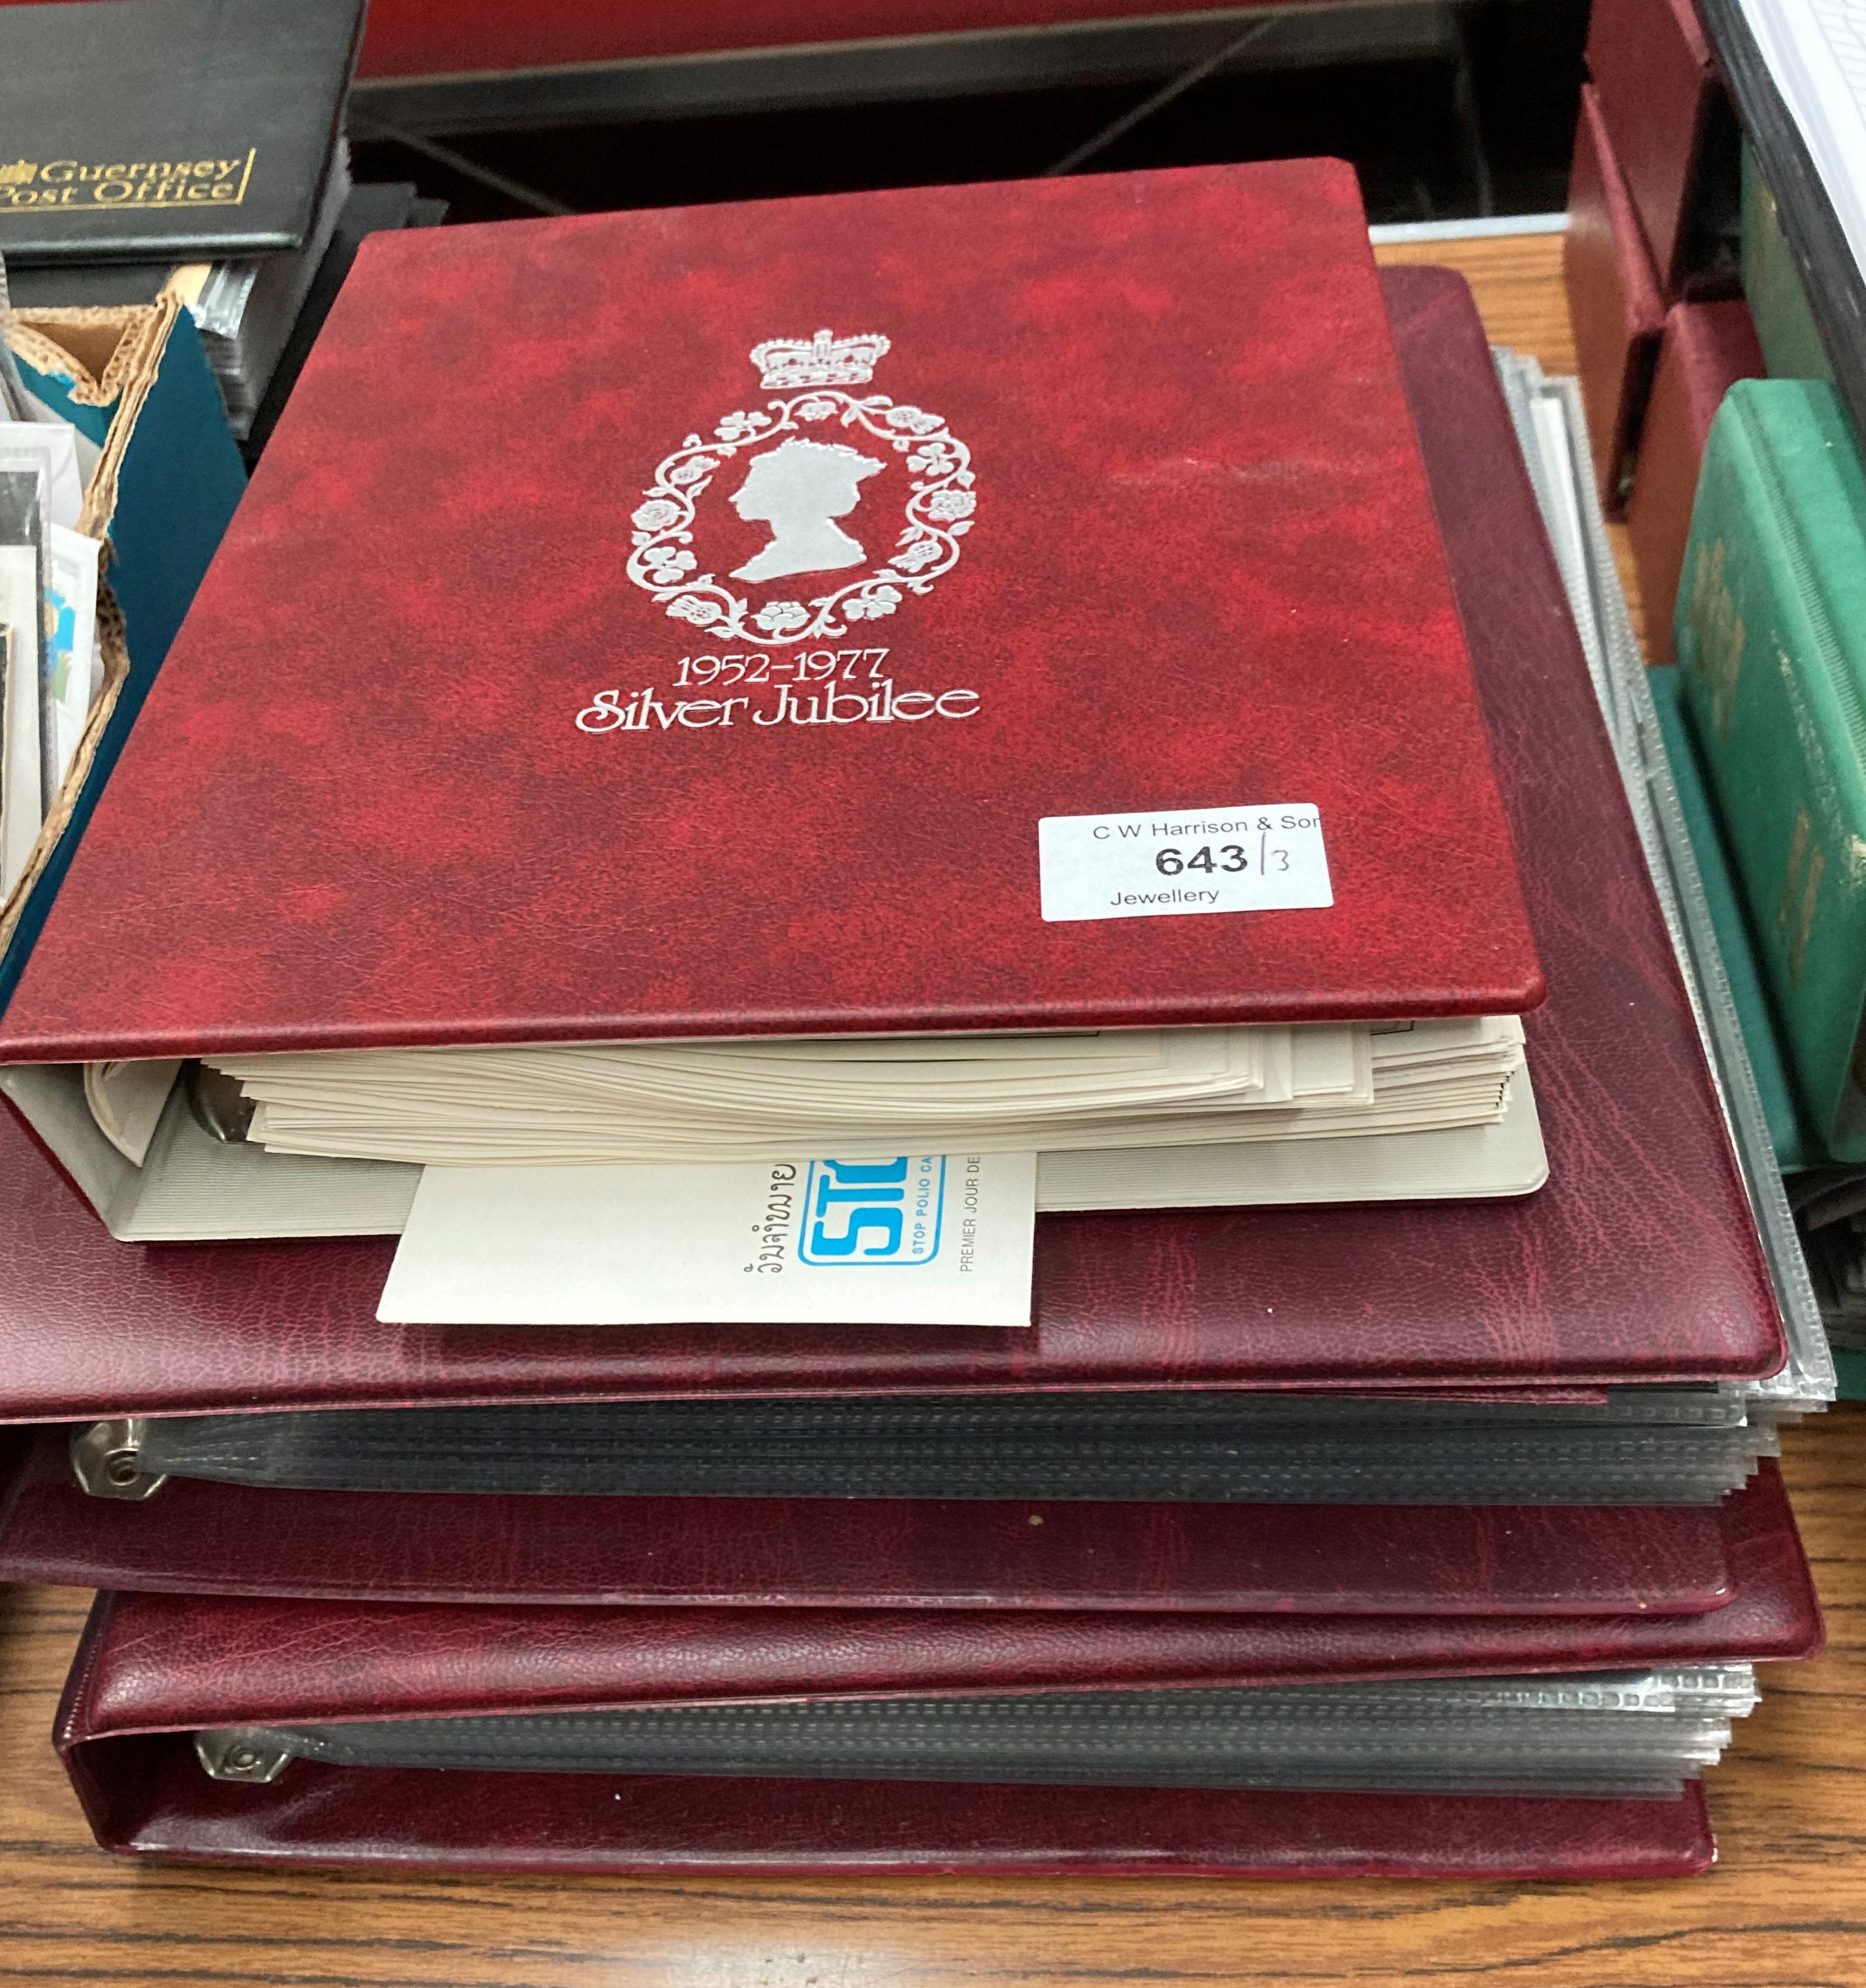 Two files containing Royal Mint First Day Covers and a file containing Commonwealth Silver Jubilee